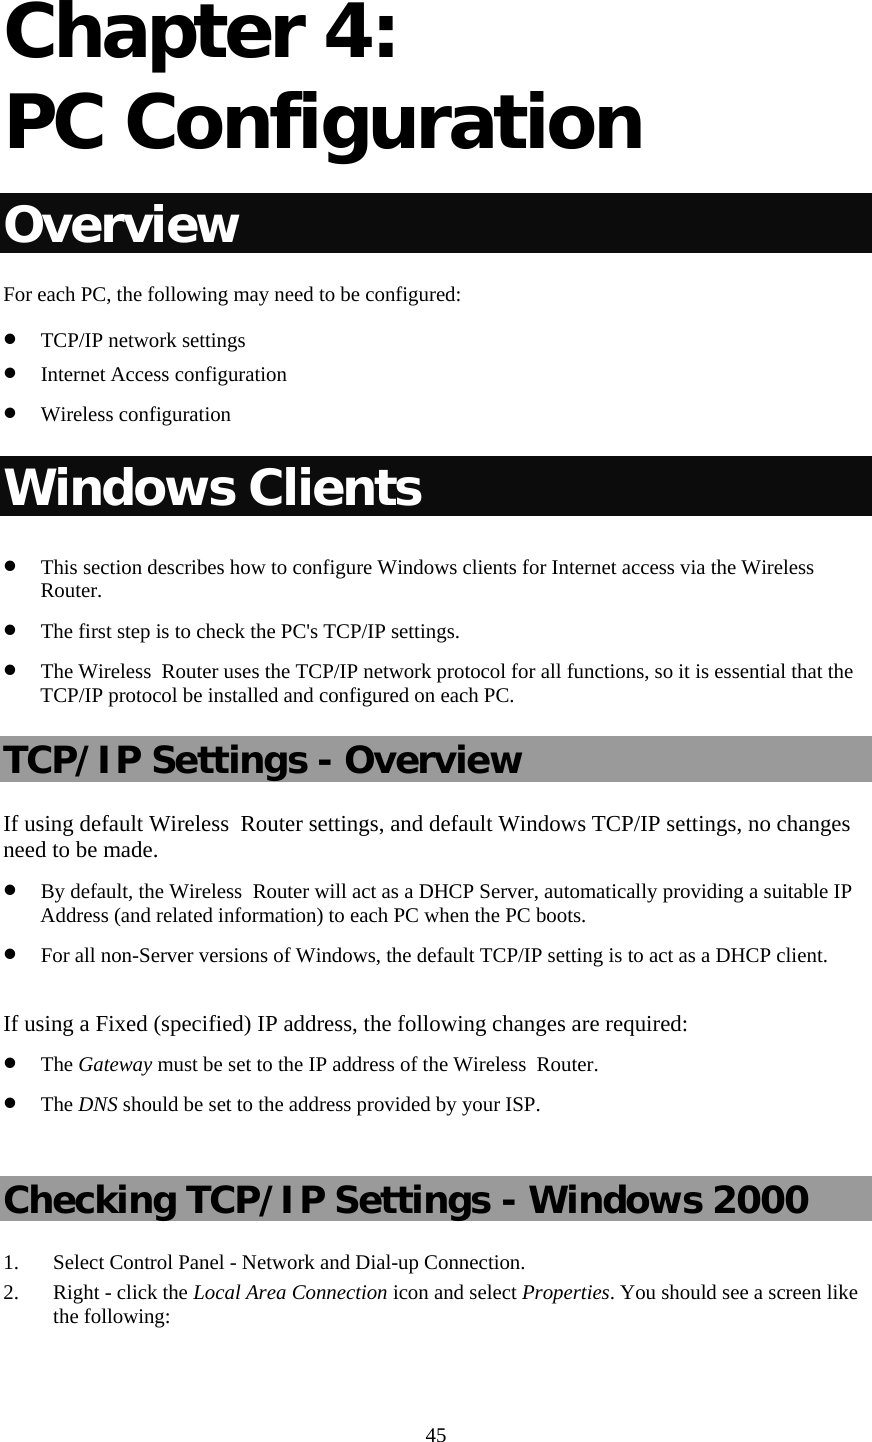   45 Chapter 4:  PC Configuration Overview For each PC, the following may need to be configured: • TCP/IP network settings • Internet Access configuration • Wireless configuration Windows Clients • This section describes how to configure Windows clients for Internet access via the Wireless  Router. • The first step is to check the PC&apos;s TCP/IP settings.  • The Wireless  Router uses the TCP/IP network protocol for all functions, so it is essential that the TCP/IP protocol be installed and configured on each PC. TCP/IP Settings - Overview If using default Wireless  Router settings, and default Windows TCP/IP settings, no changes need to be made. • By default, the Wireless  Router will act as a DHCP Server, automatically providing a suitable IP Address (and related information) to each PC when the PC boots. • For all non-Server versions of Windows, the default TCP/IP setting is to act as a DHCP client.  If using a Fixed (specified) IP address, the following changes are required: • The Gateway must be set to the IP address of the Wireless  Router. • The DNS should be set to the address provided by your ISP.  Checking TCP/IP Settings - Windows 2000 1. Select Control Panel - Network and Dial-up Connection. 2. Right - click the Local Area Connection icon and select Properties. You should see a screen like the following: 